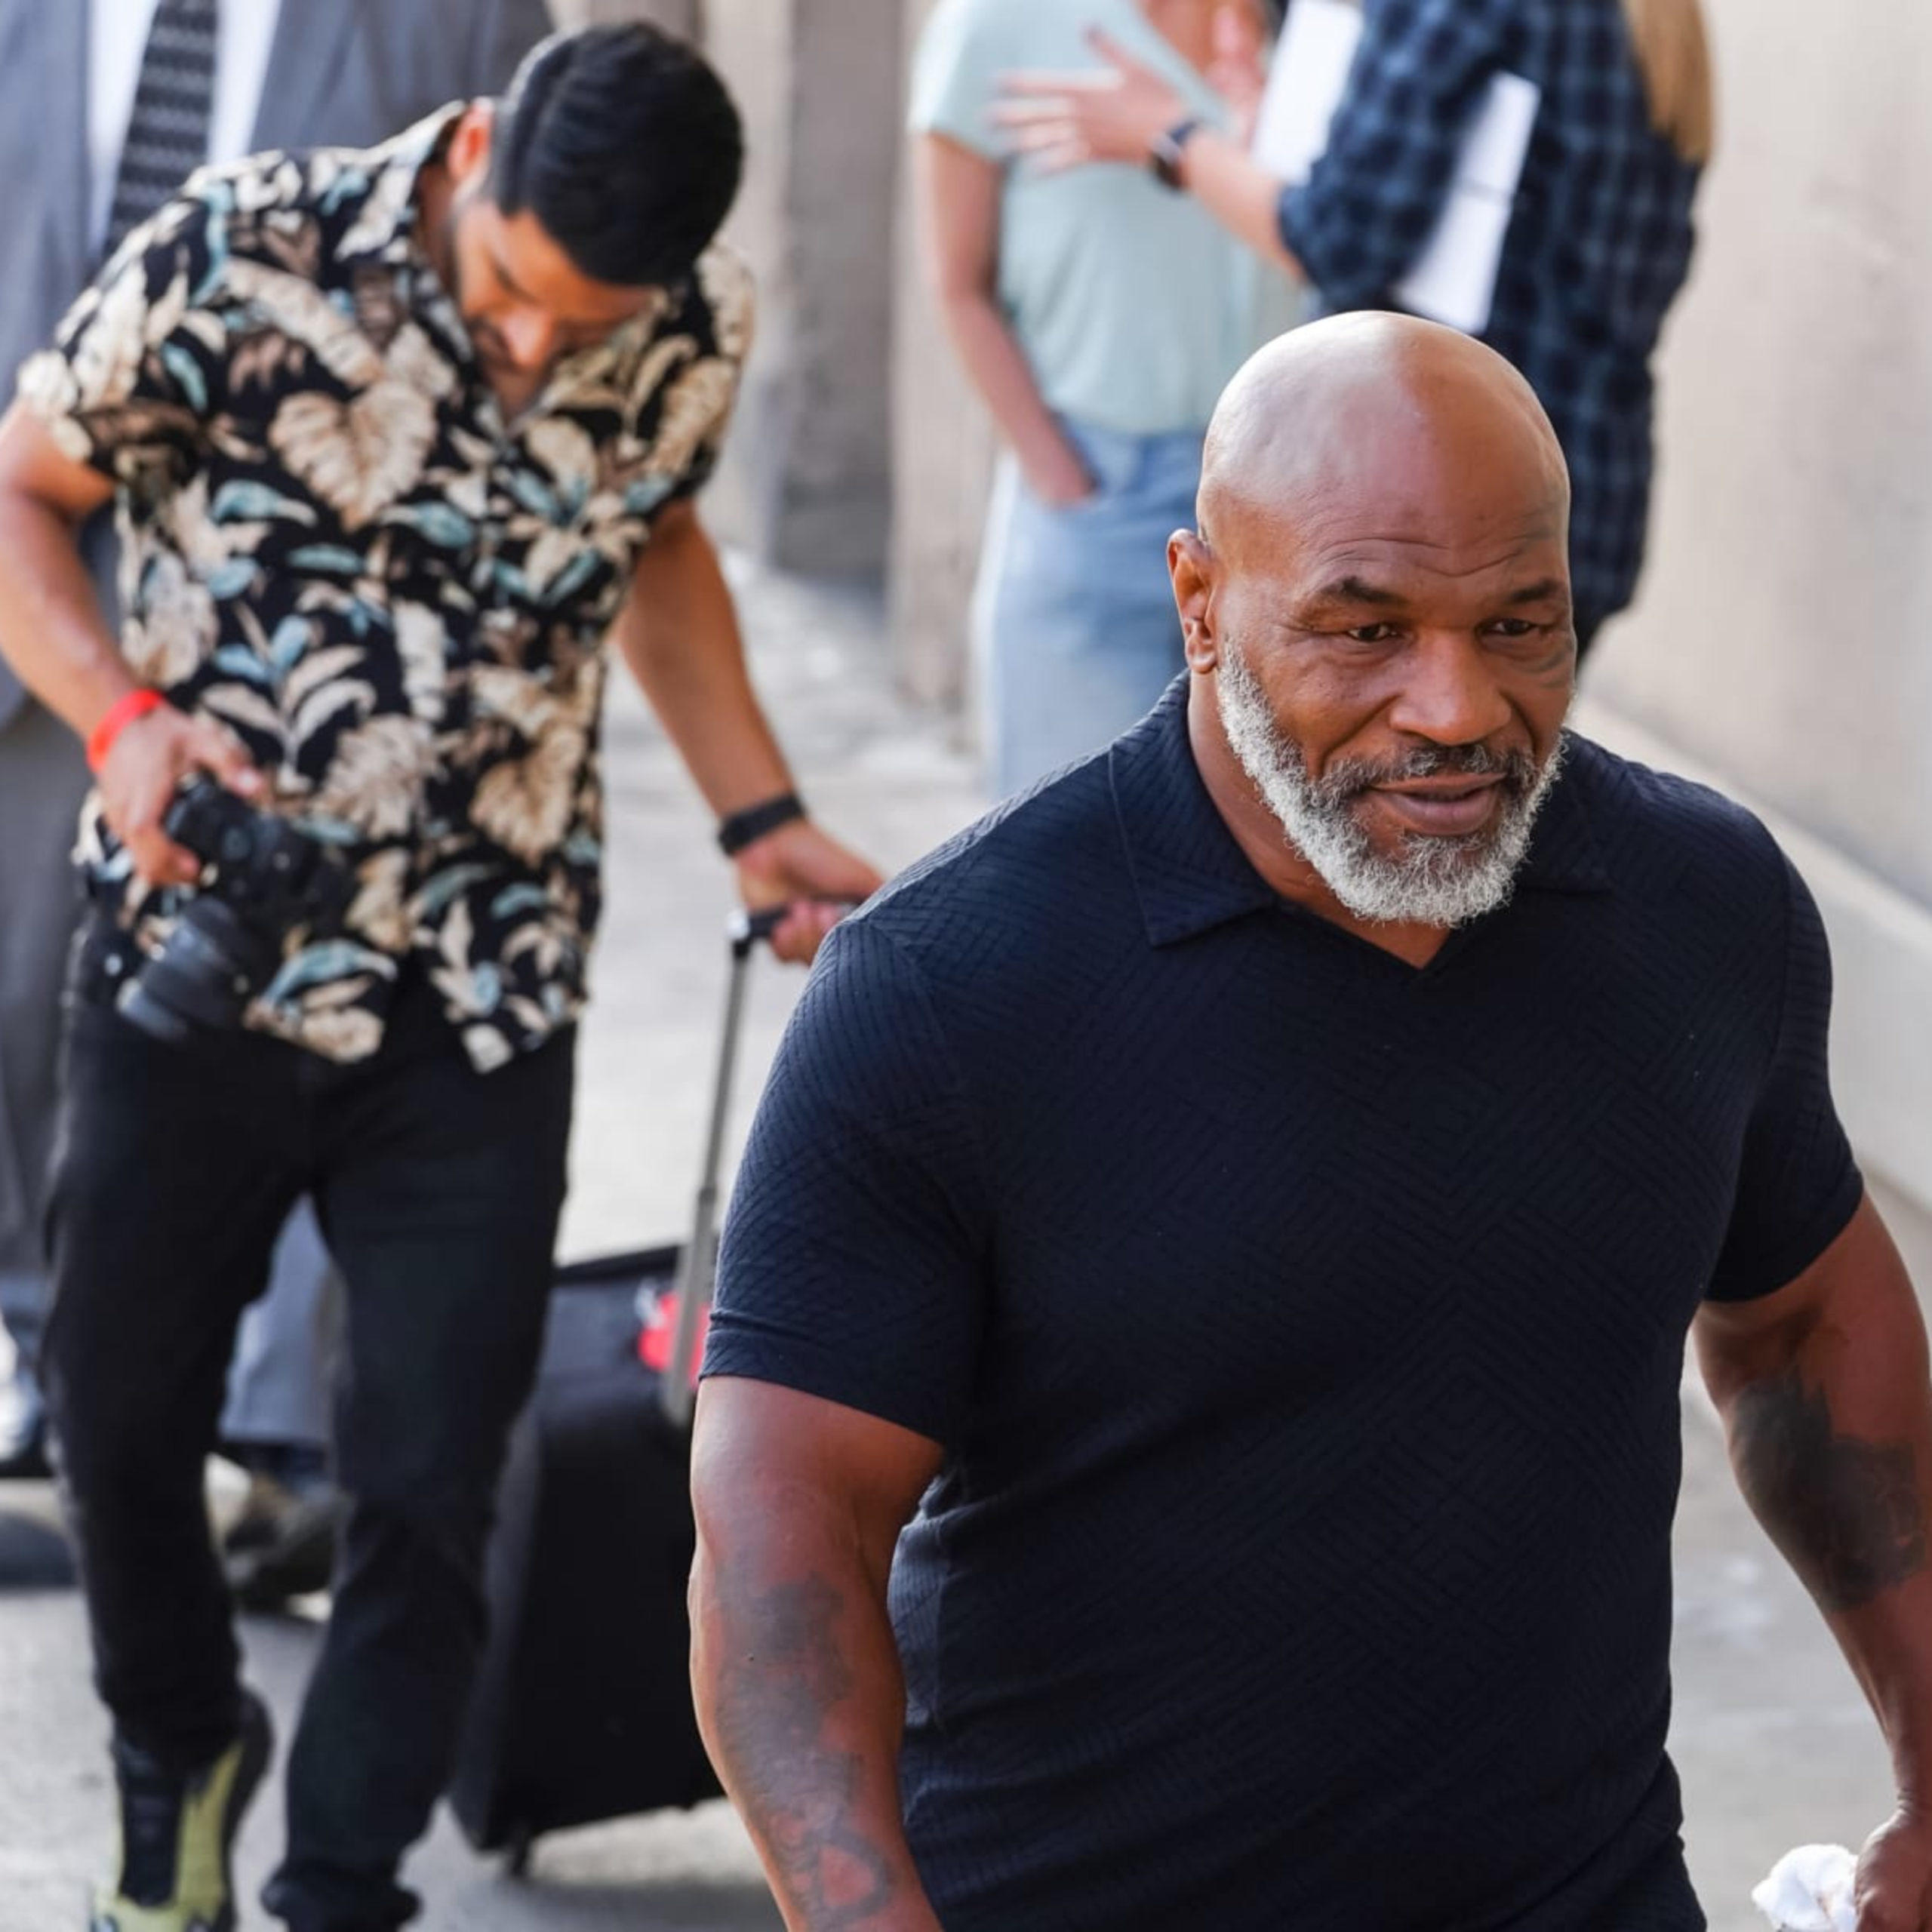 Report: Mike Tyson Not Dealing with Injury Despite Being Spotted Using Cane in NYC